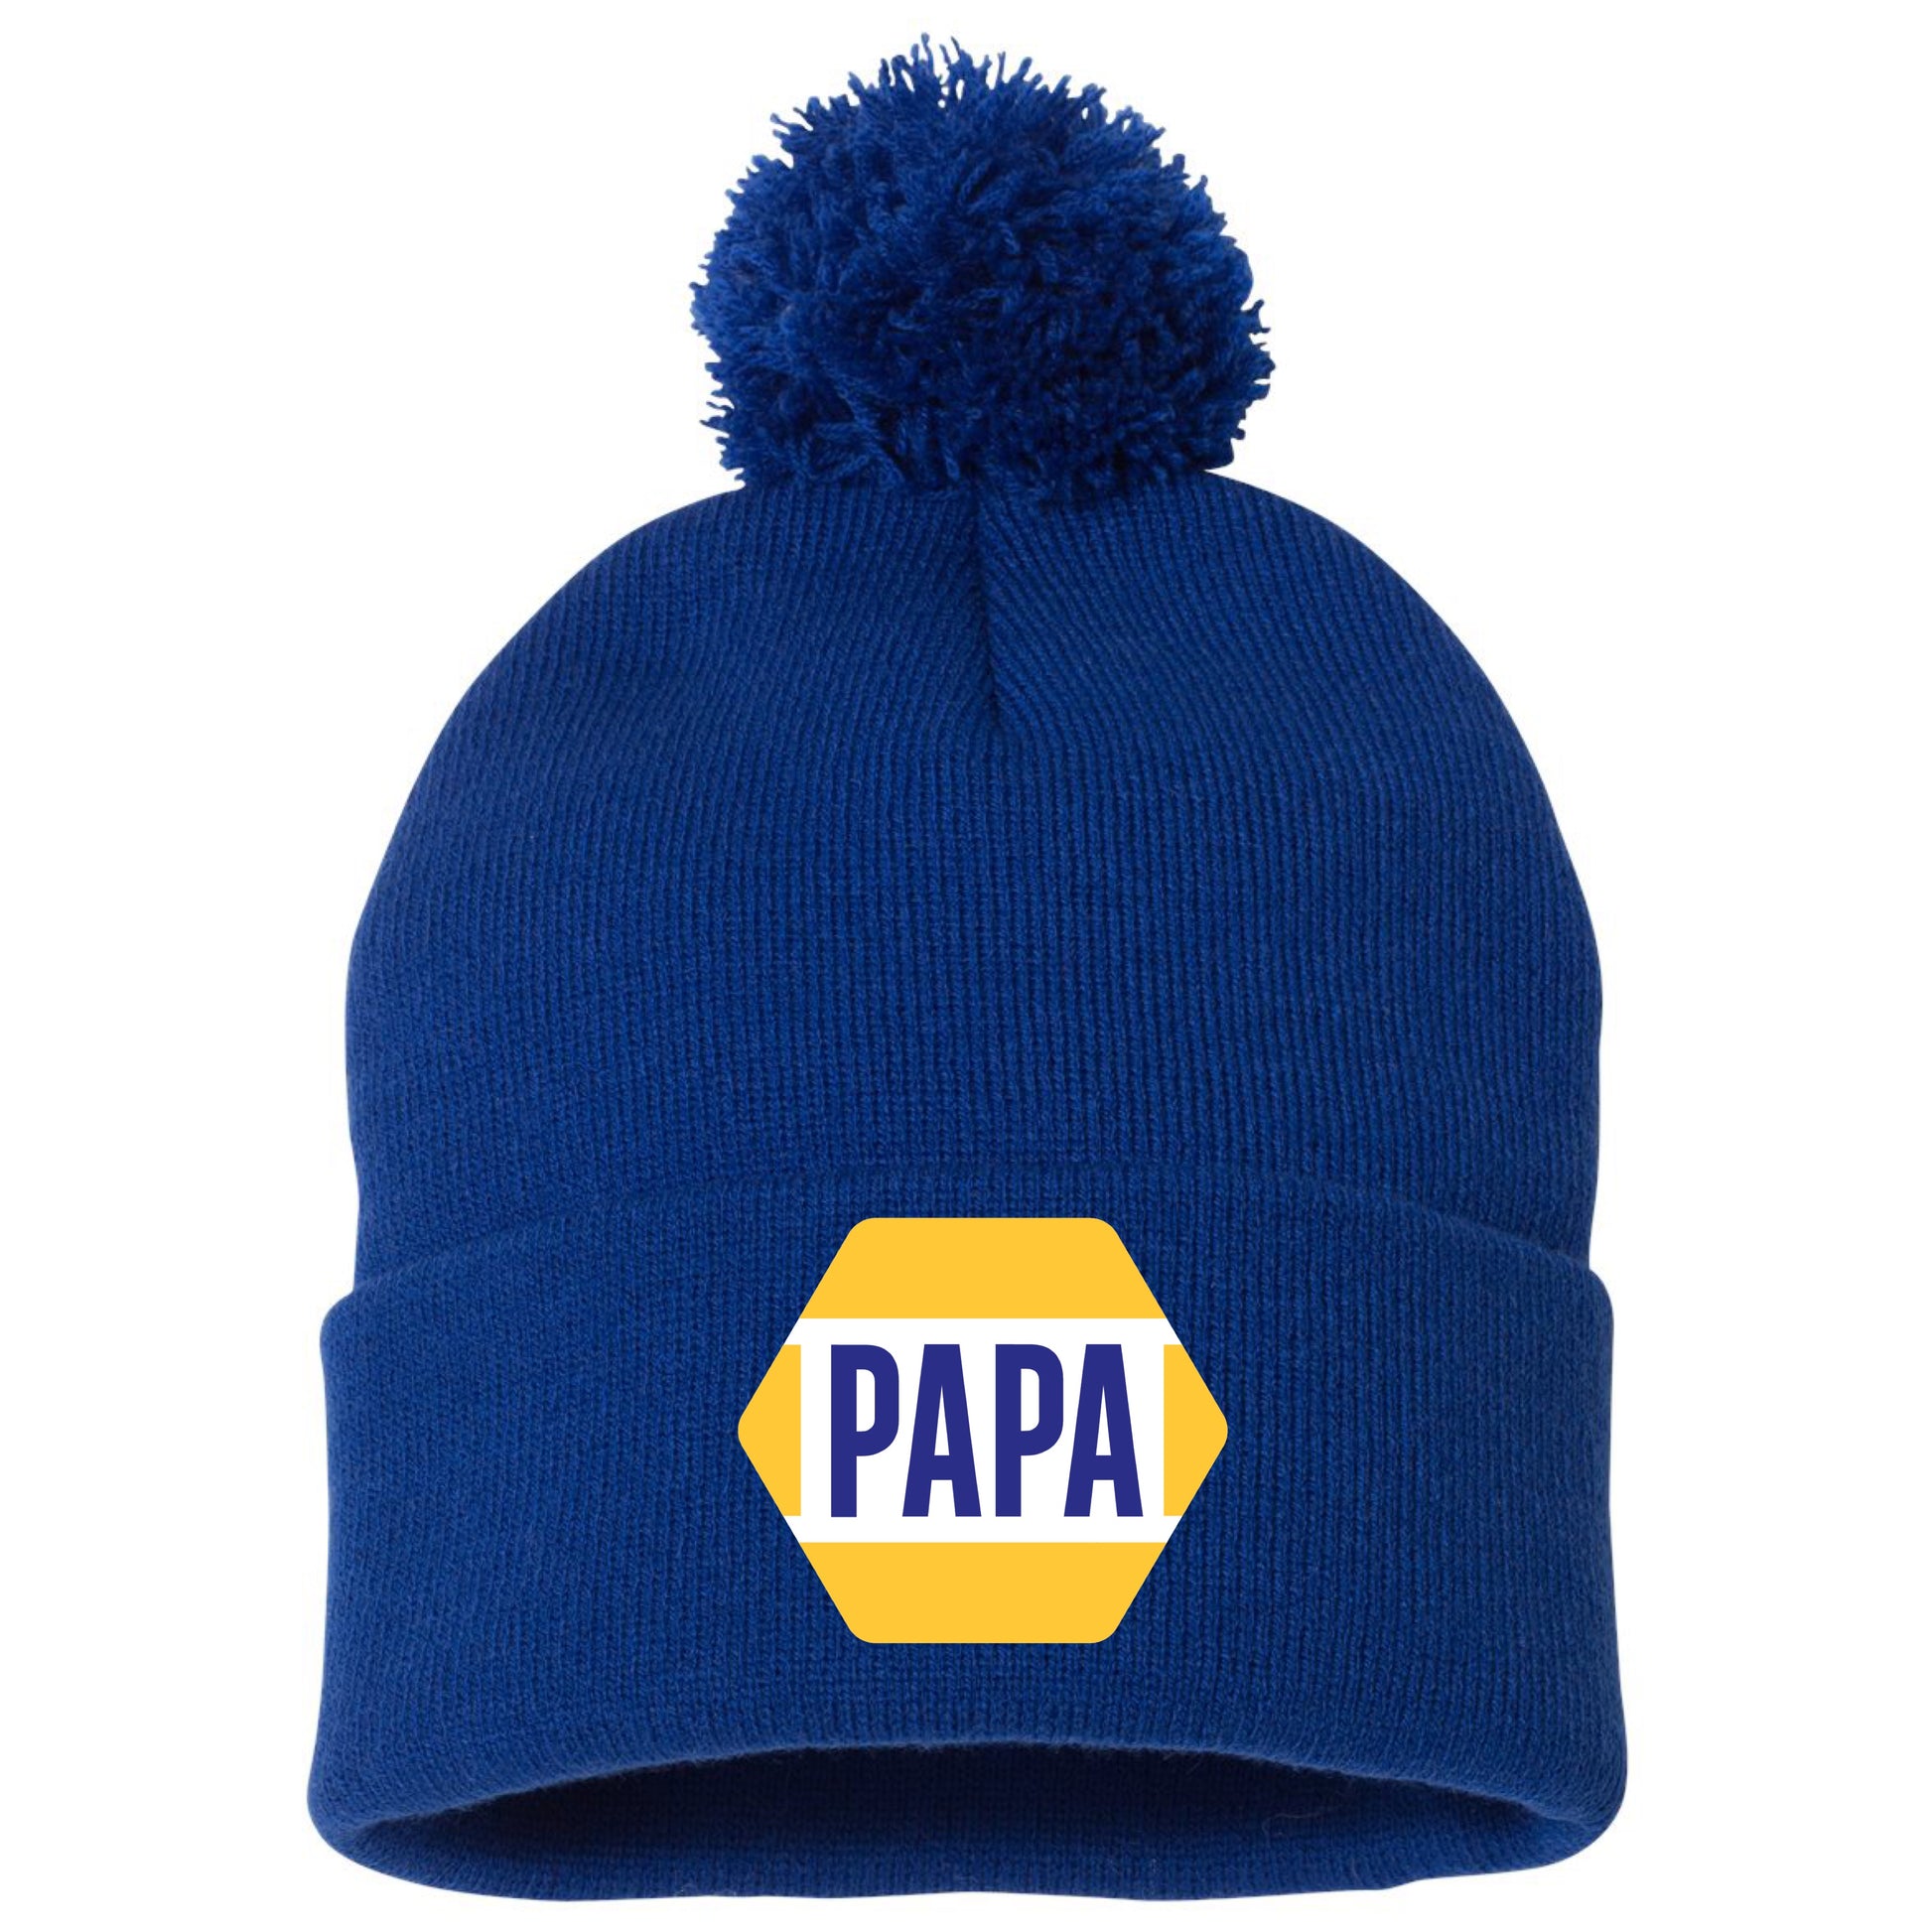 PAPA Know How 3D 12 in Knit Pom-Pom Top Beanie- Royal - Ten Gallon Hat Co.